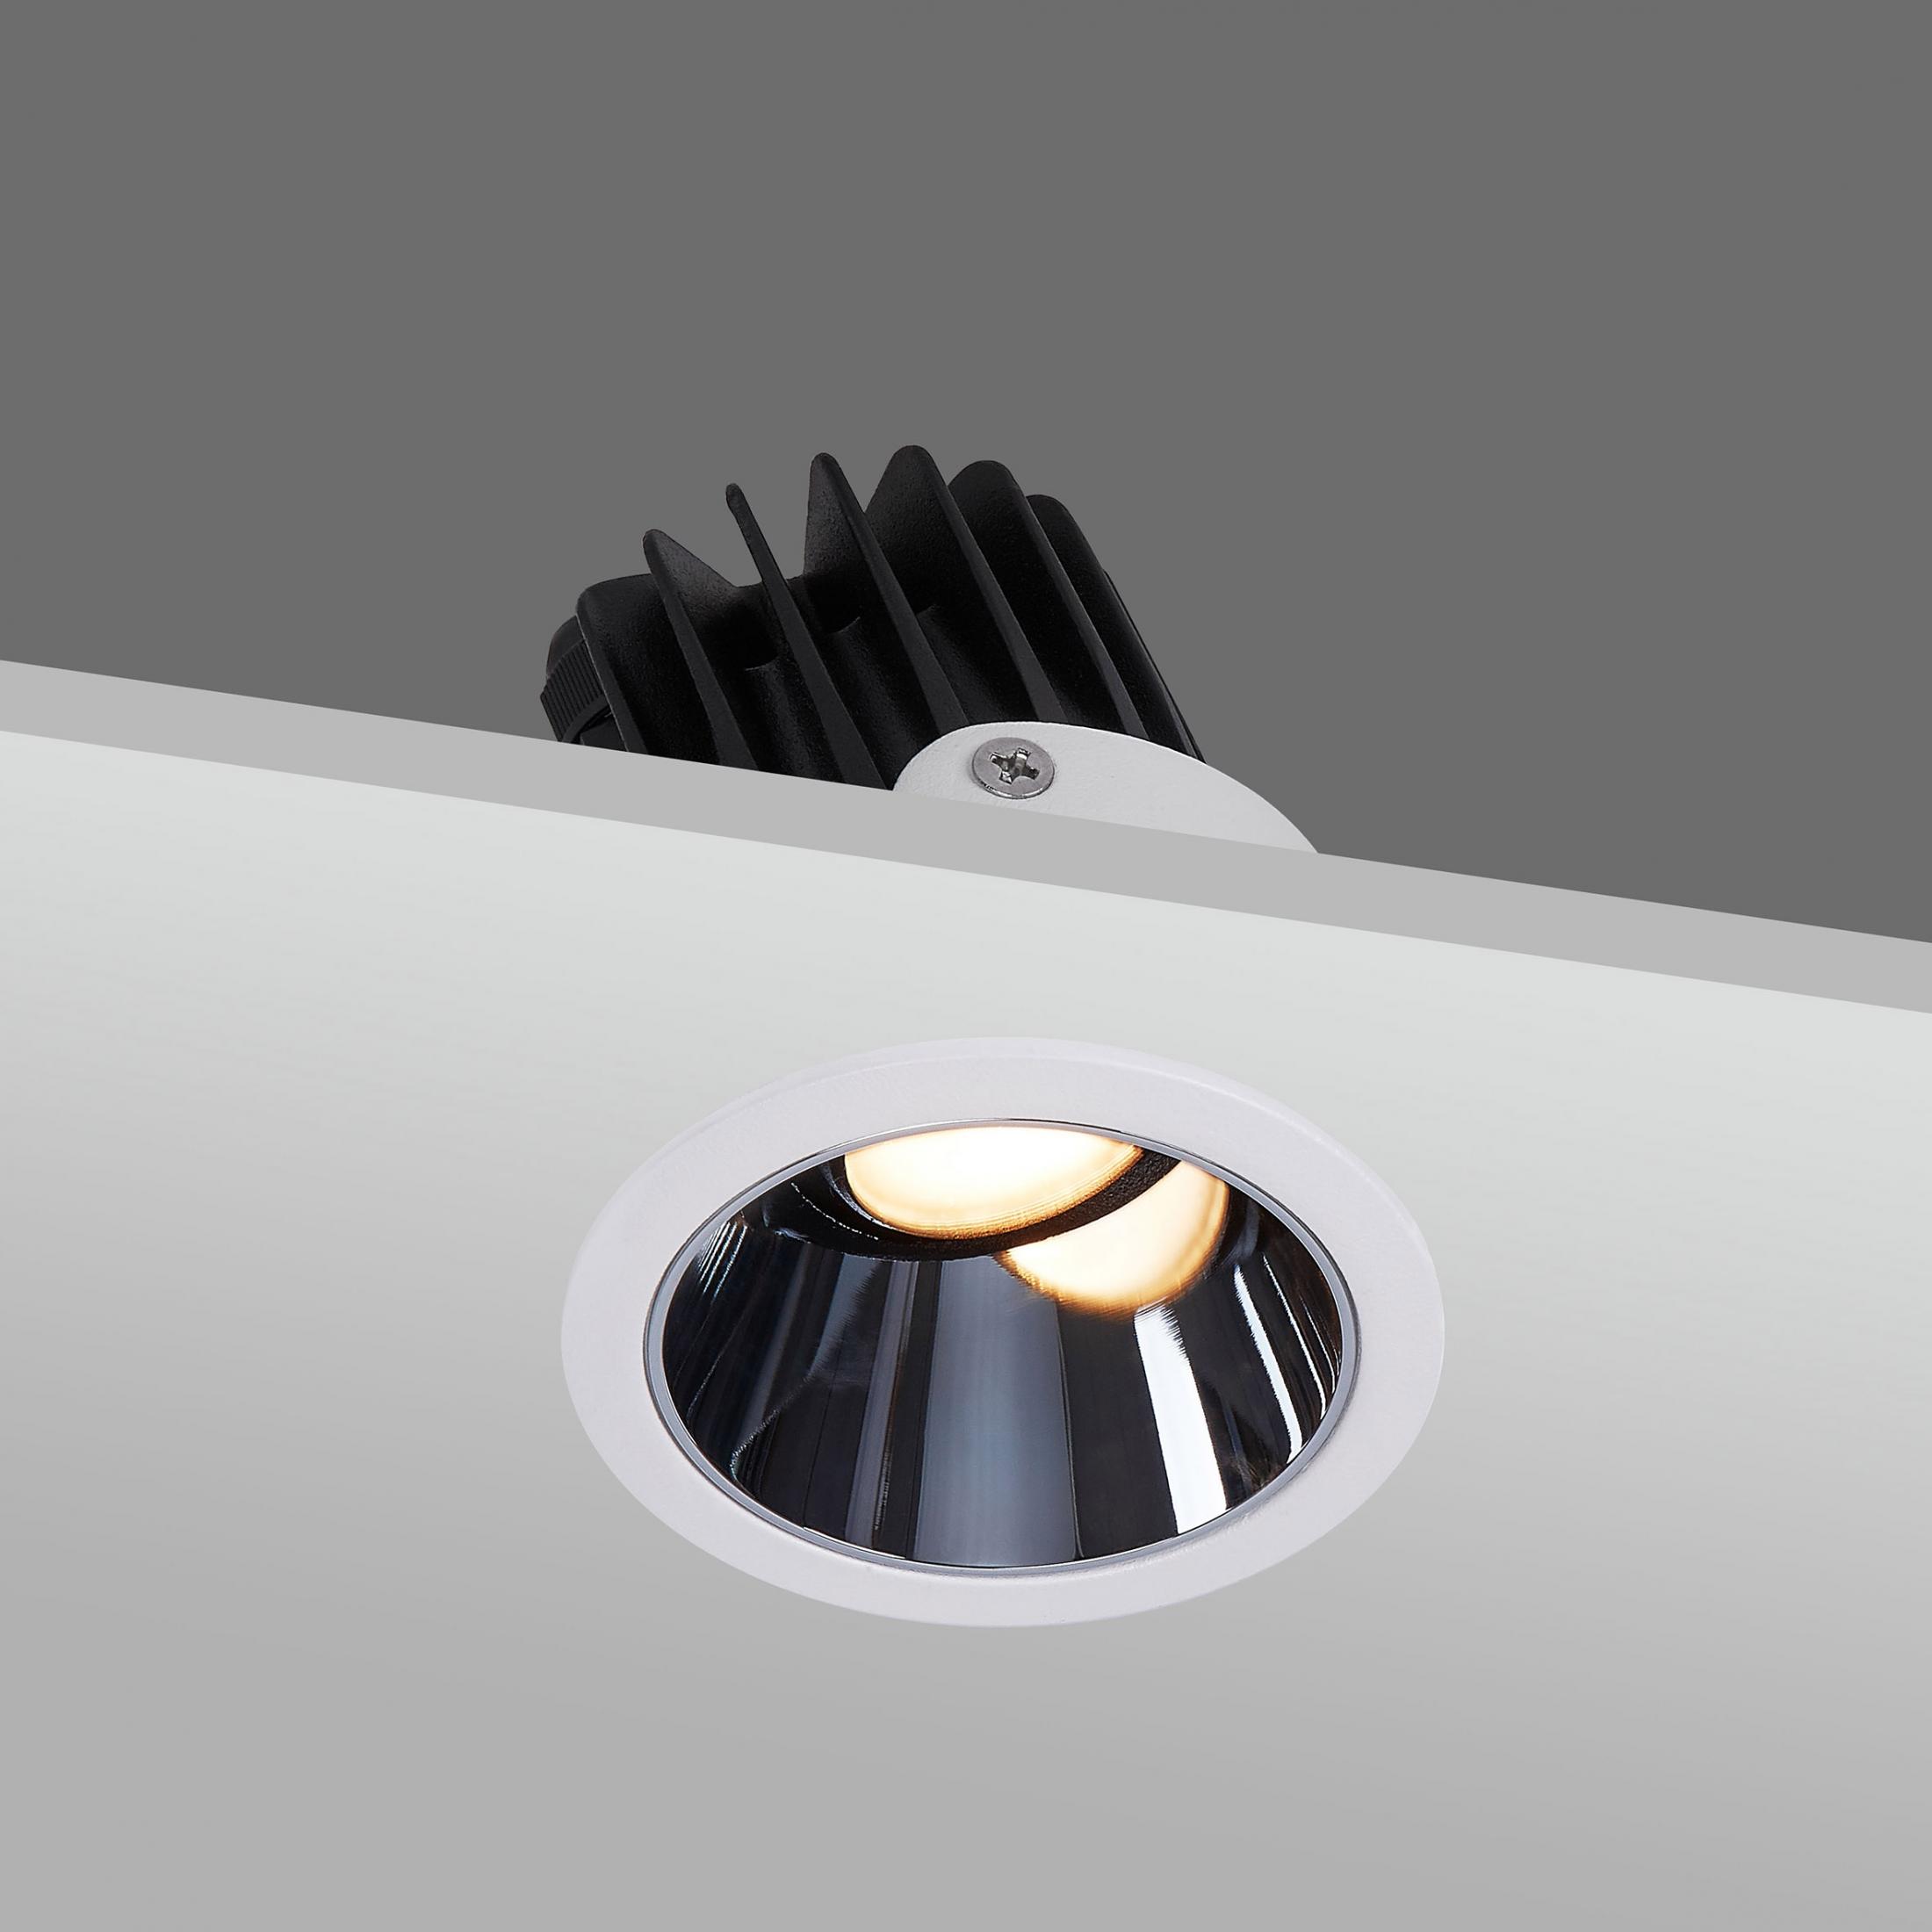  7W LED Recessed adjustable downlight